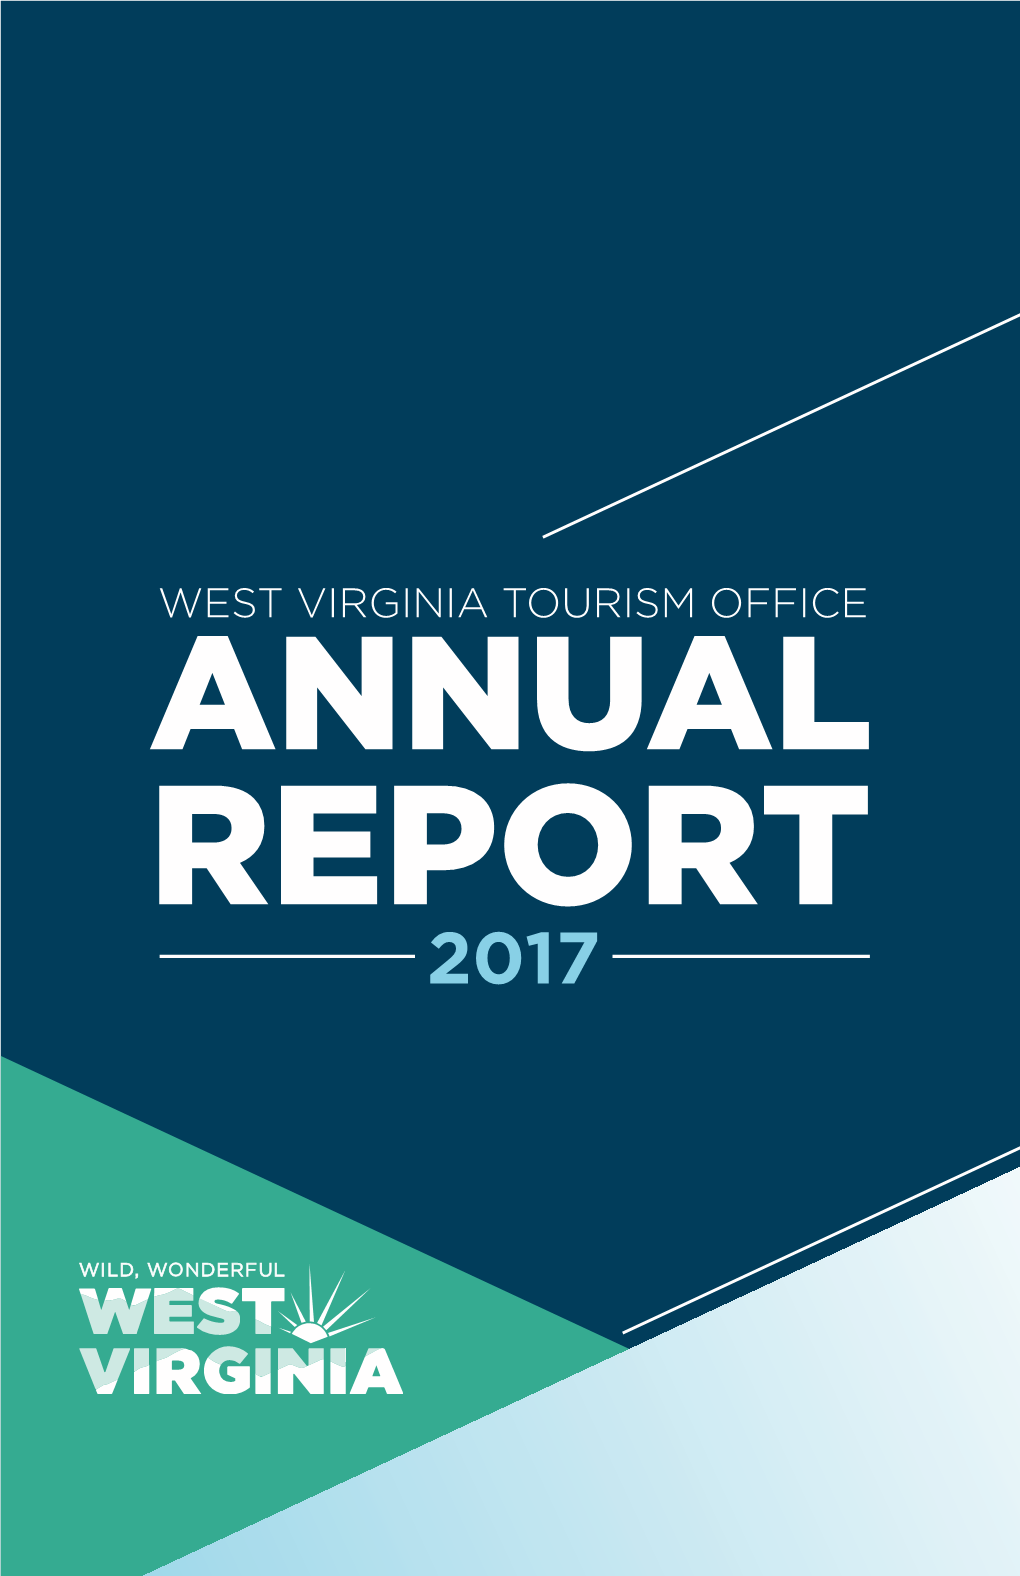 REPORT 2017 Greetings INDUSTRY OVERVIEW from the COMMISSIONER the Tourism Industry in West Virginia Is Strong